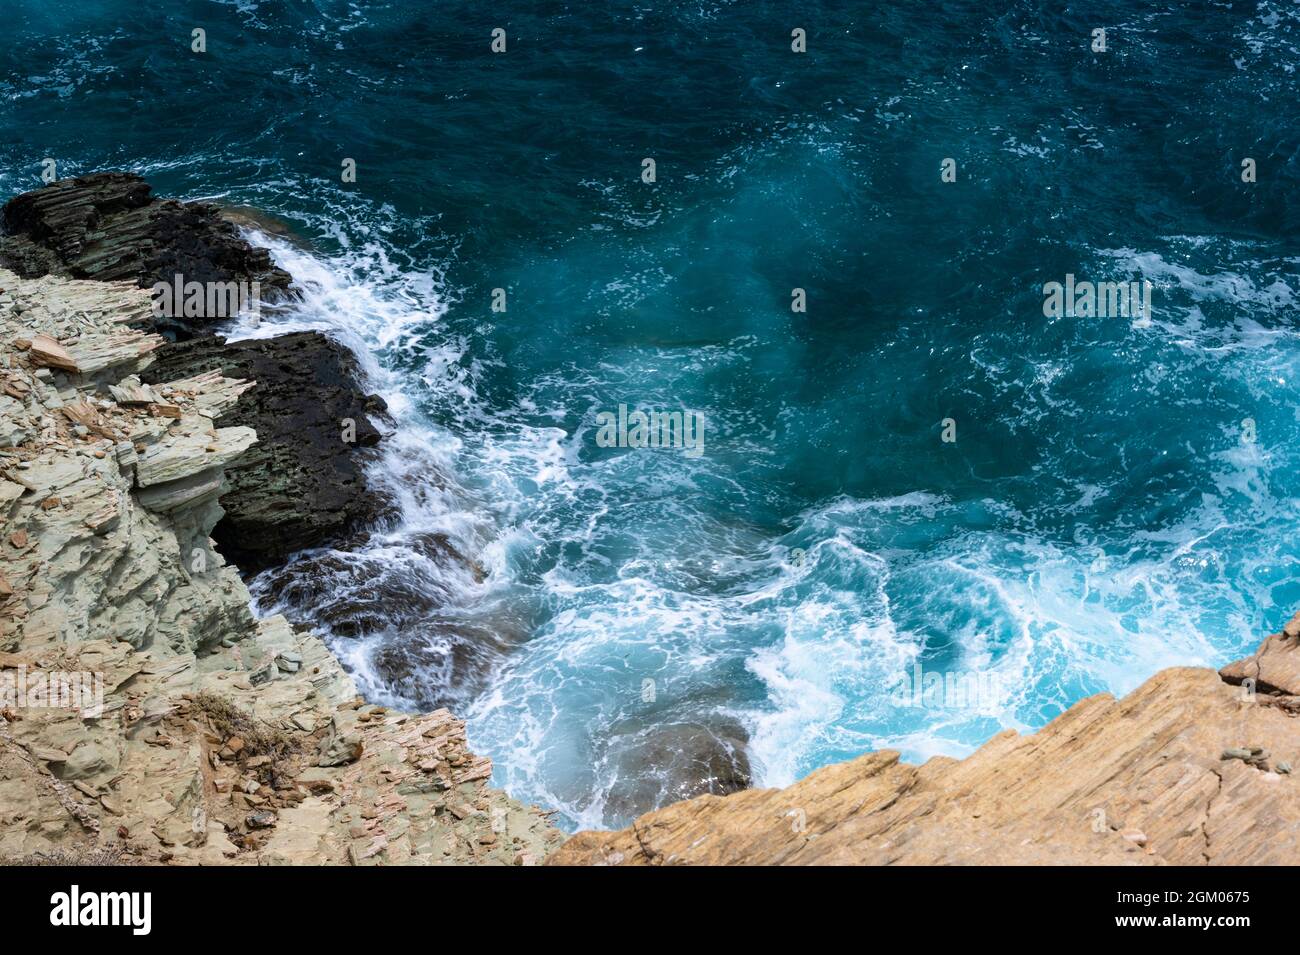 Aquamarine water with waves by a rocky coastline Stock Photo